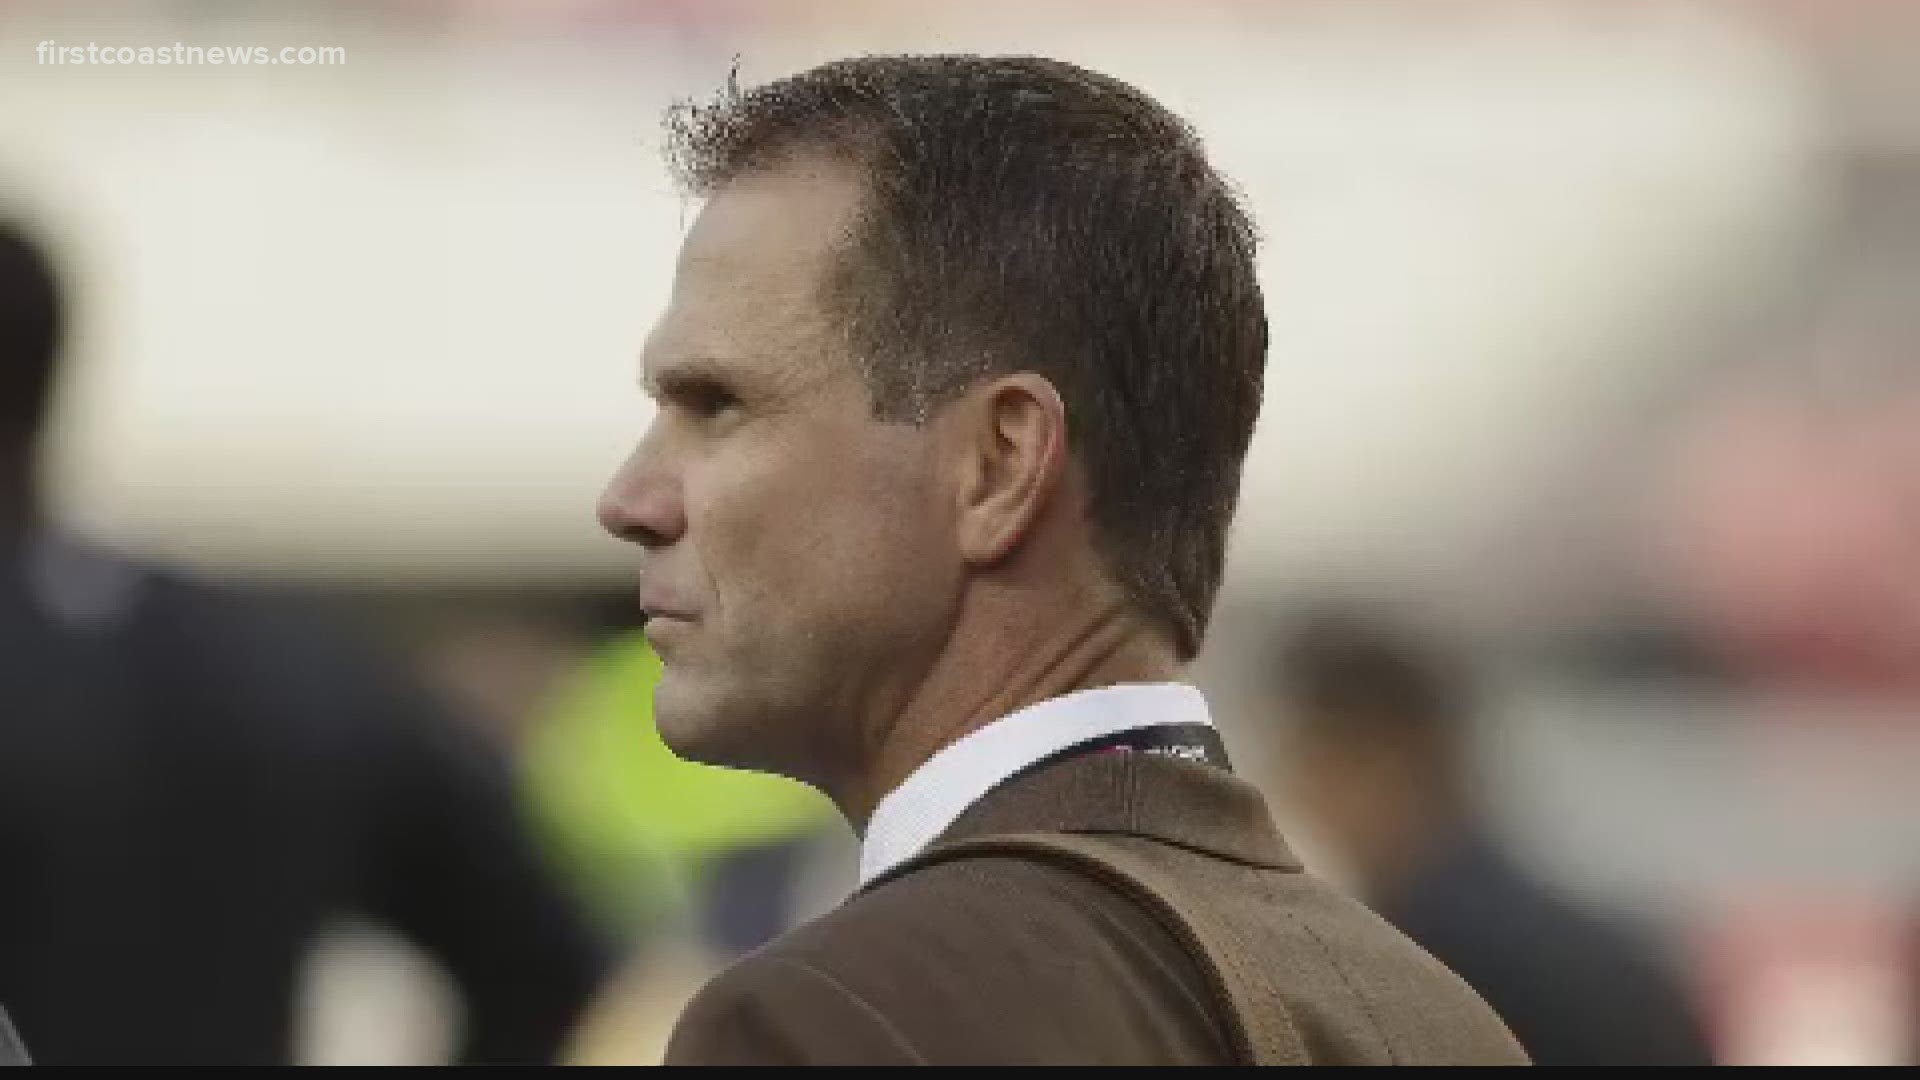 Baalke was named interim GM after Dave Caldwell was fired in November. He previously served as 49ers GM